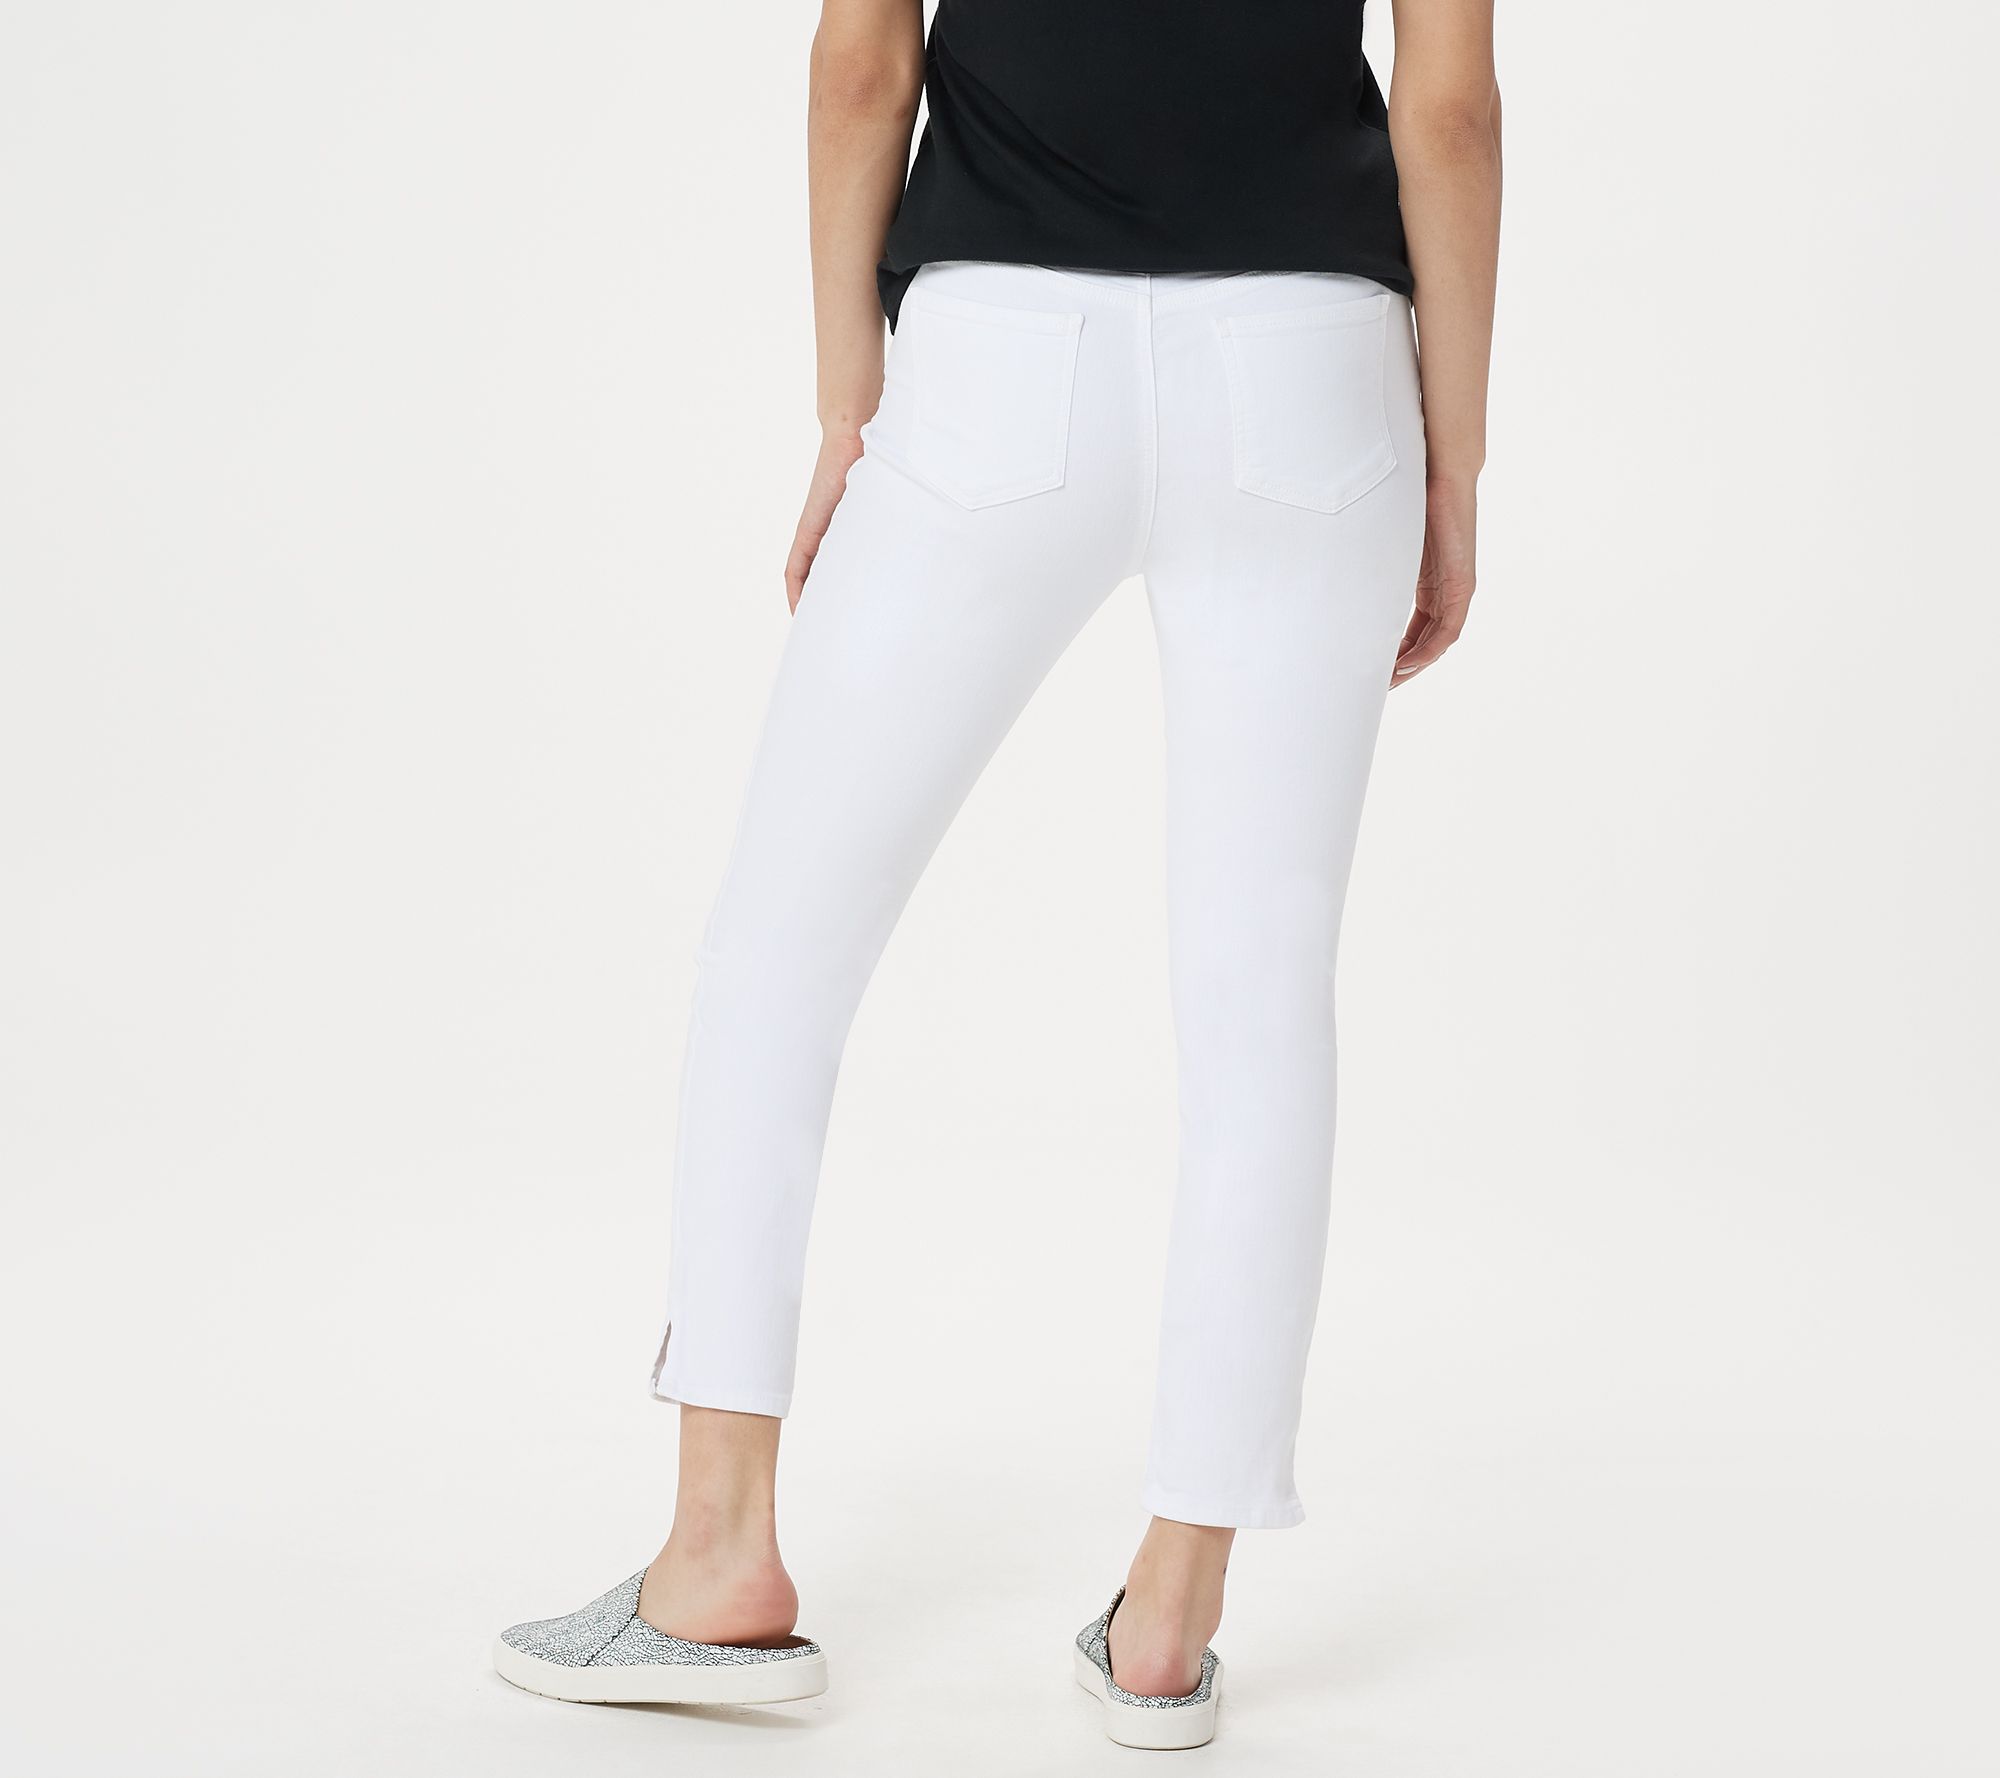 NYDJ Ami Skinny Ankle Jeans with Side Slits -Optic White - QVC.com